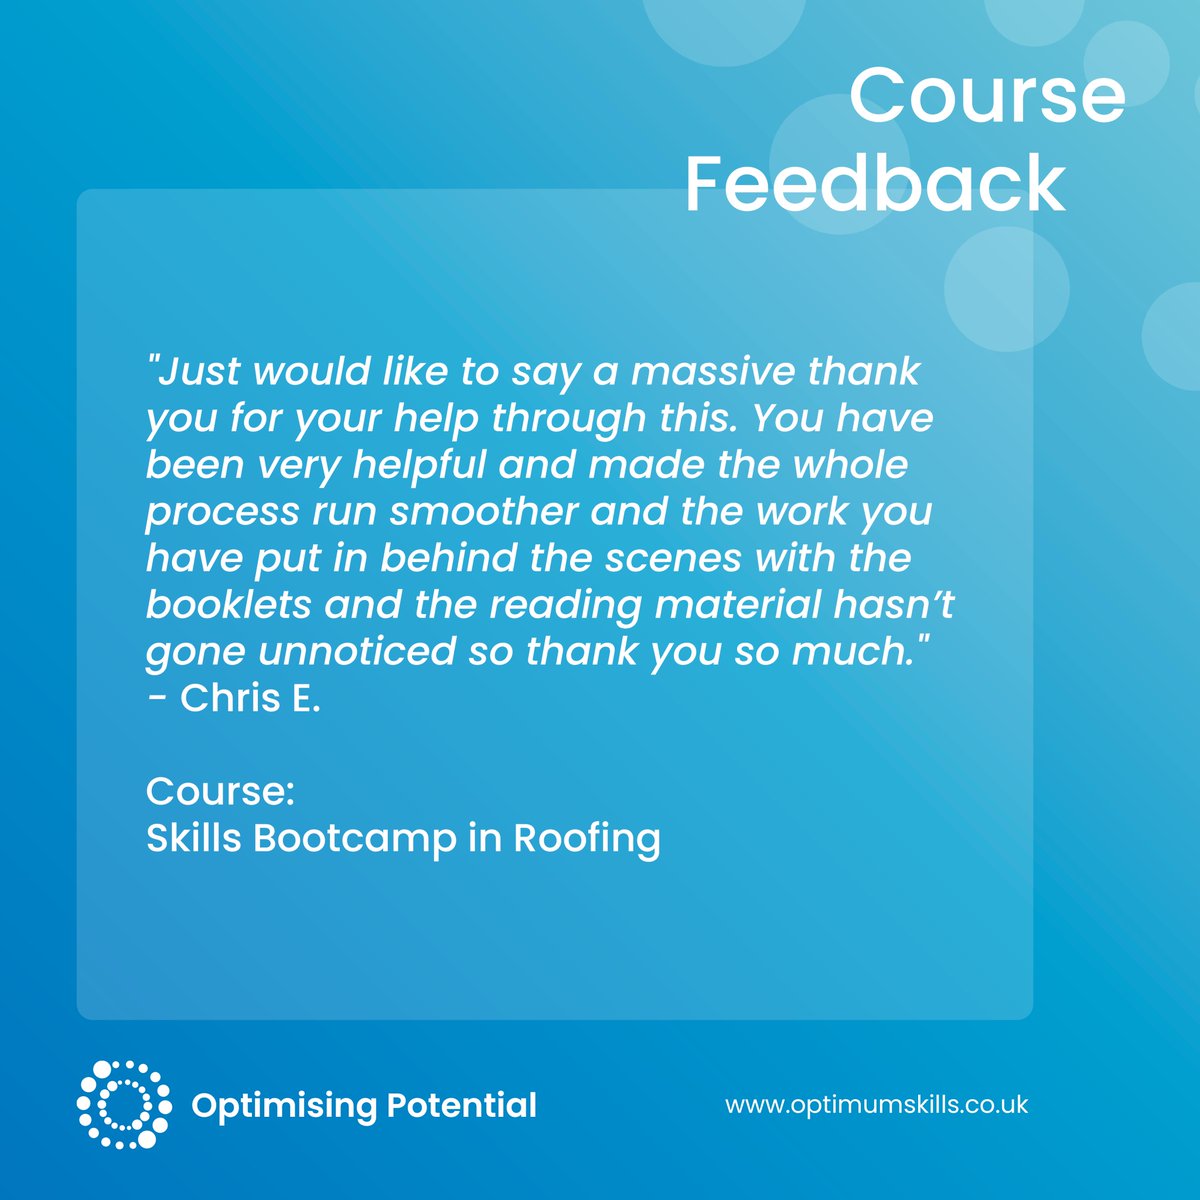 Some great feedback for our own Chris Messenger, Roofing Apprenticeship Tutor, from one of his learners who is very grateful for the support he's received to complete his roofing NVQ! ⭐ 

#CourseFeedback #SuccessStories #SkillsBootcamps #SkillsForLife